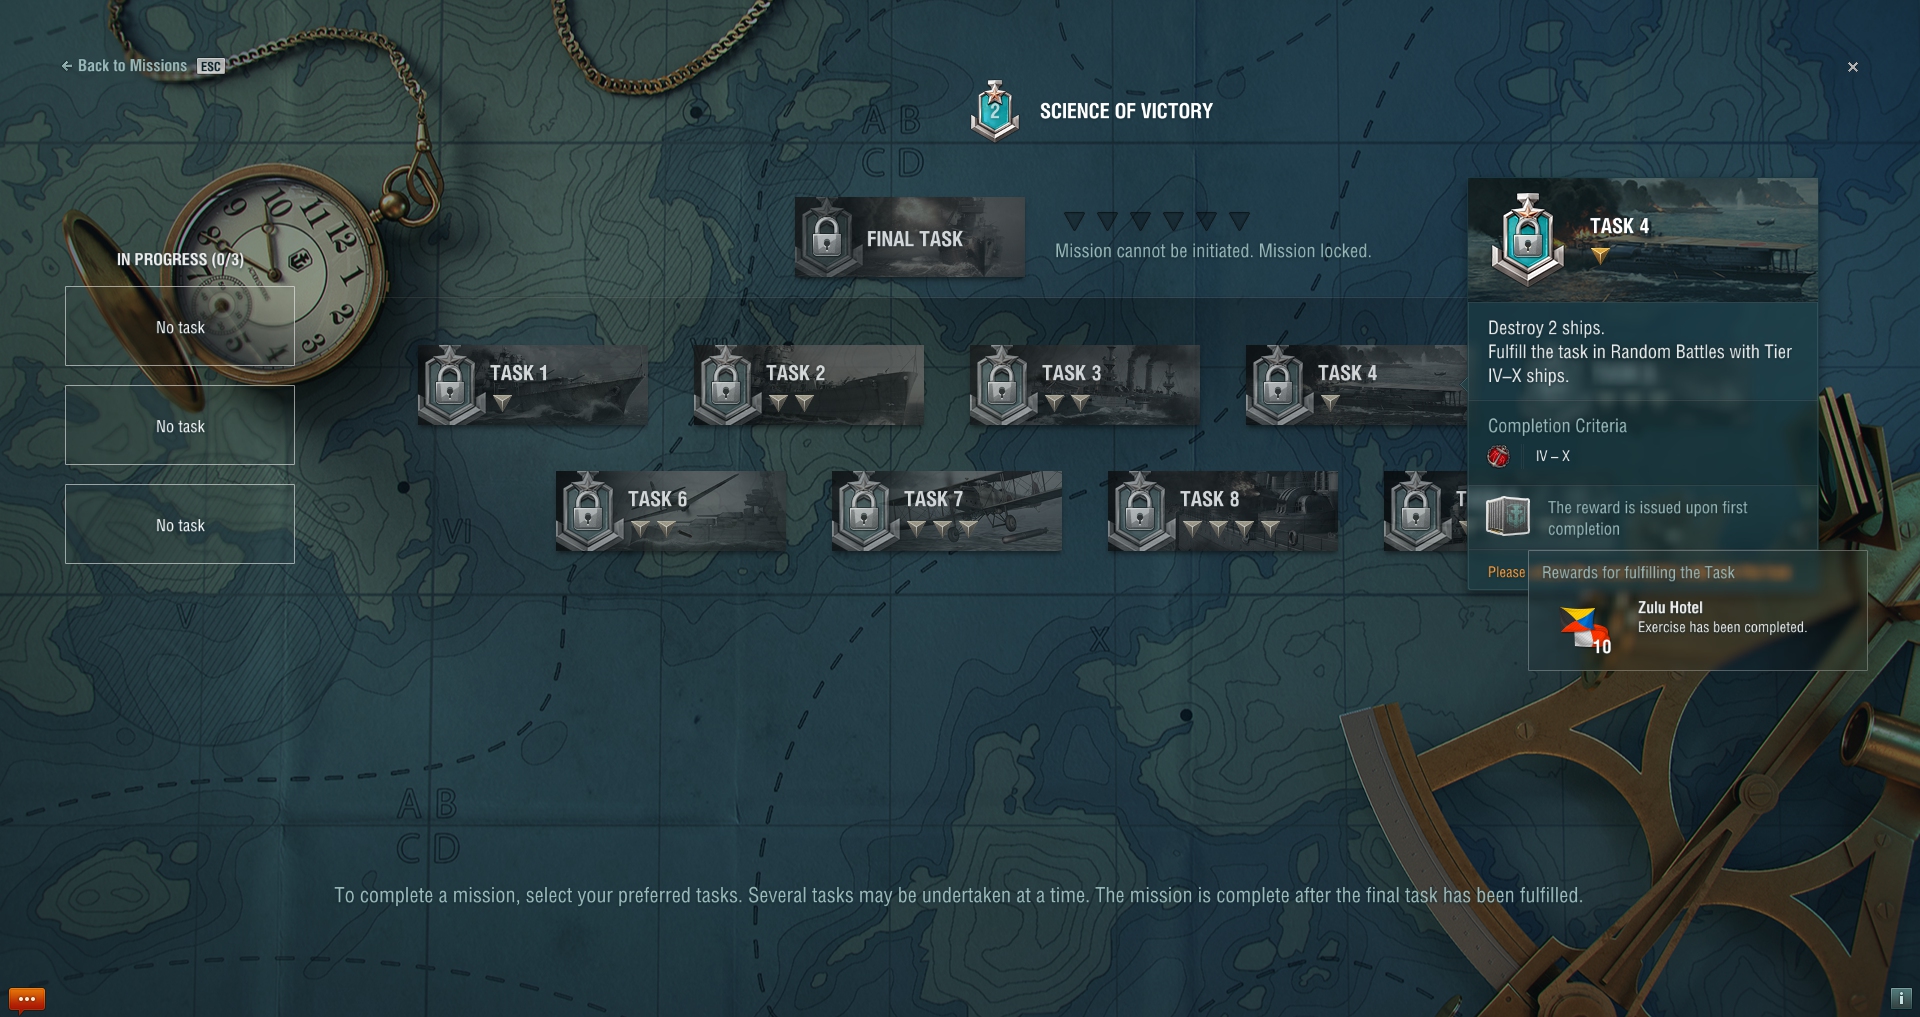 world of warships operation of the week rewards after complete five stars